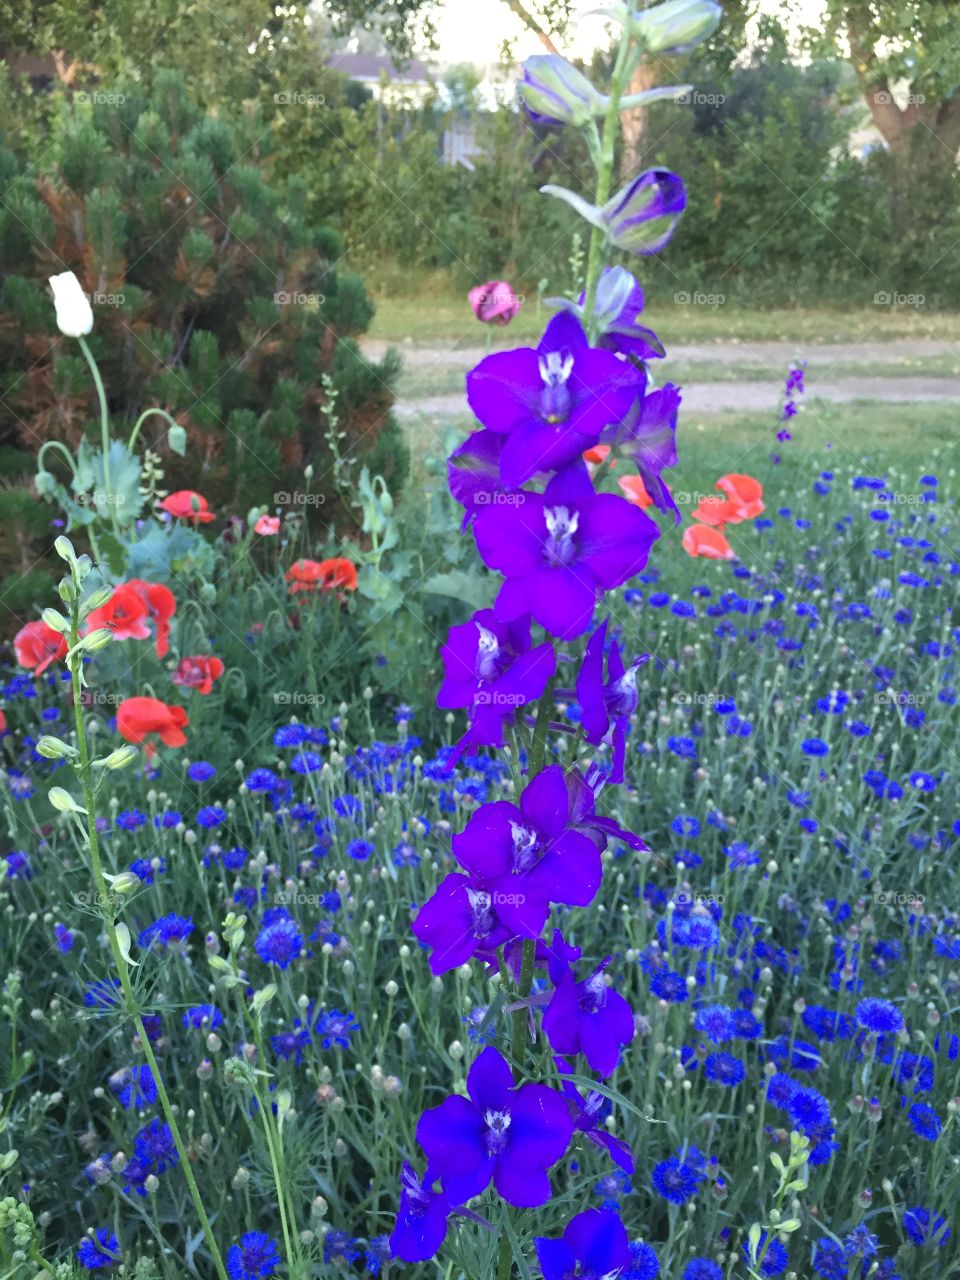 Flower bed. Flower bed full of larkspur,  poppies, and bachelor buttons